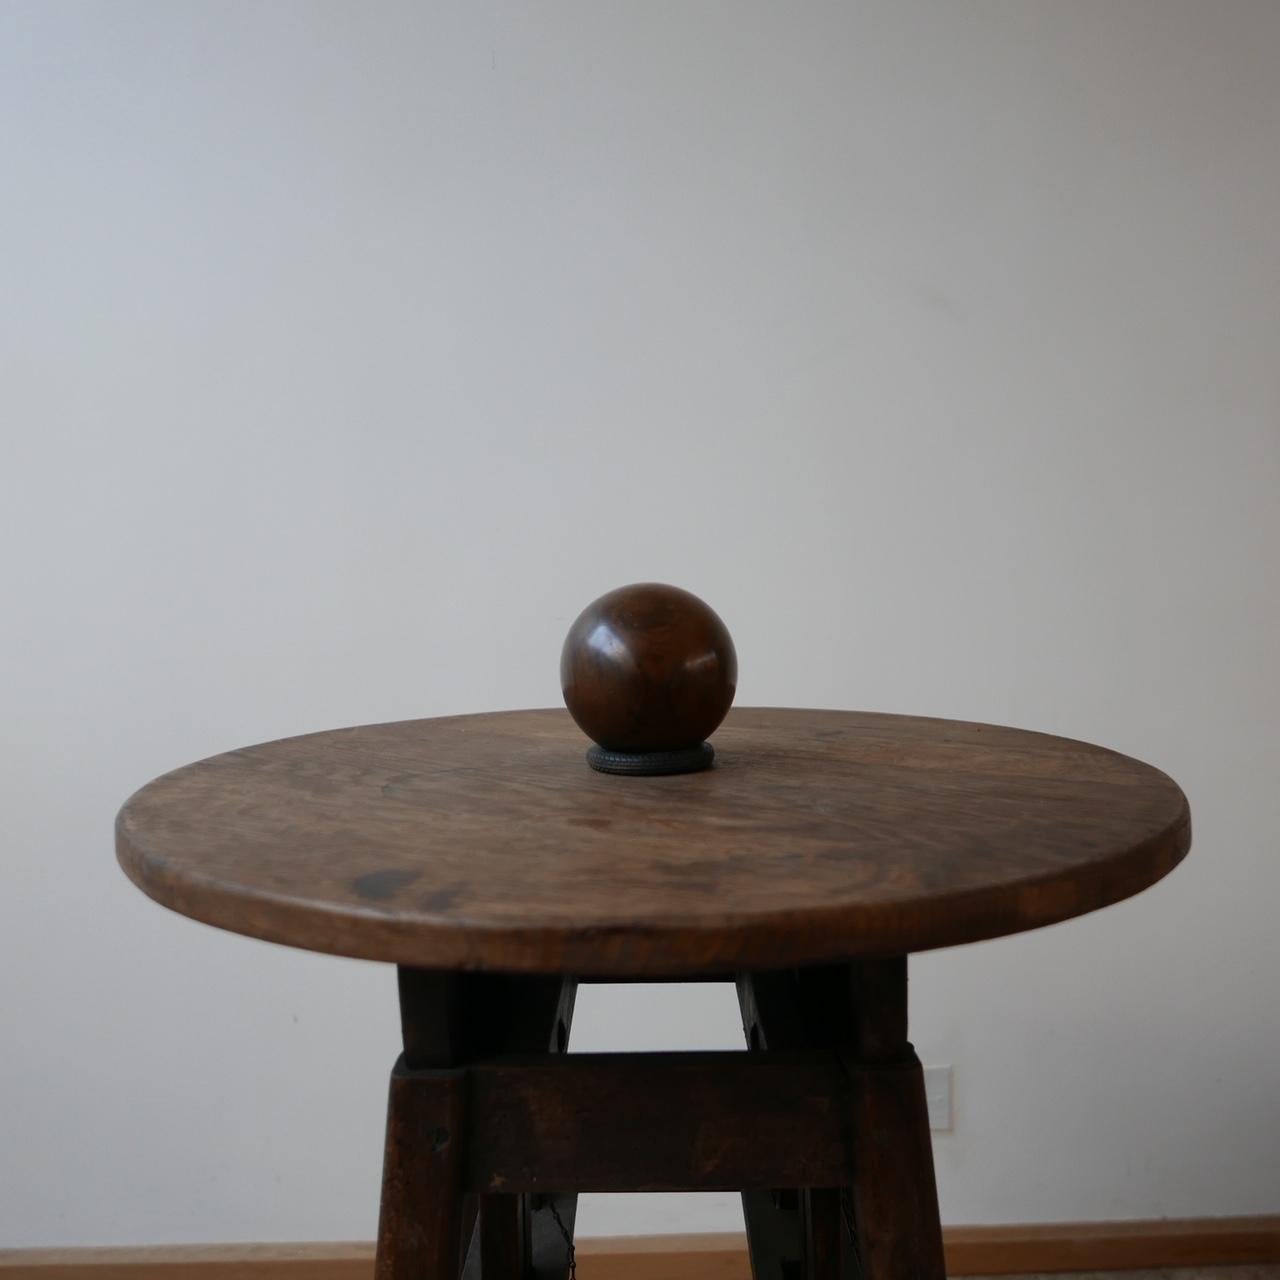 A large turned ball.

Very tactile, solid walnut ball.

Early 20th century, Holland.

Currently residing on a vintage toy wheel which is an odd pairing but means the ball can be turned without rolling away.

Full of character. Perfect